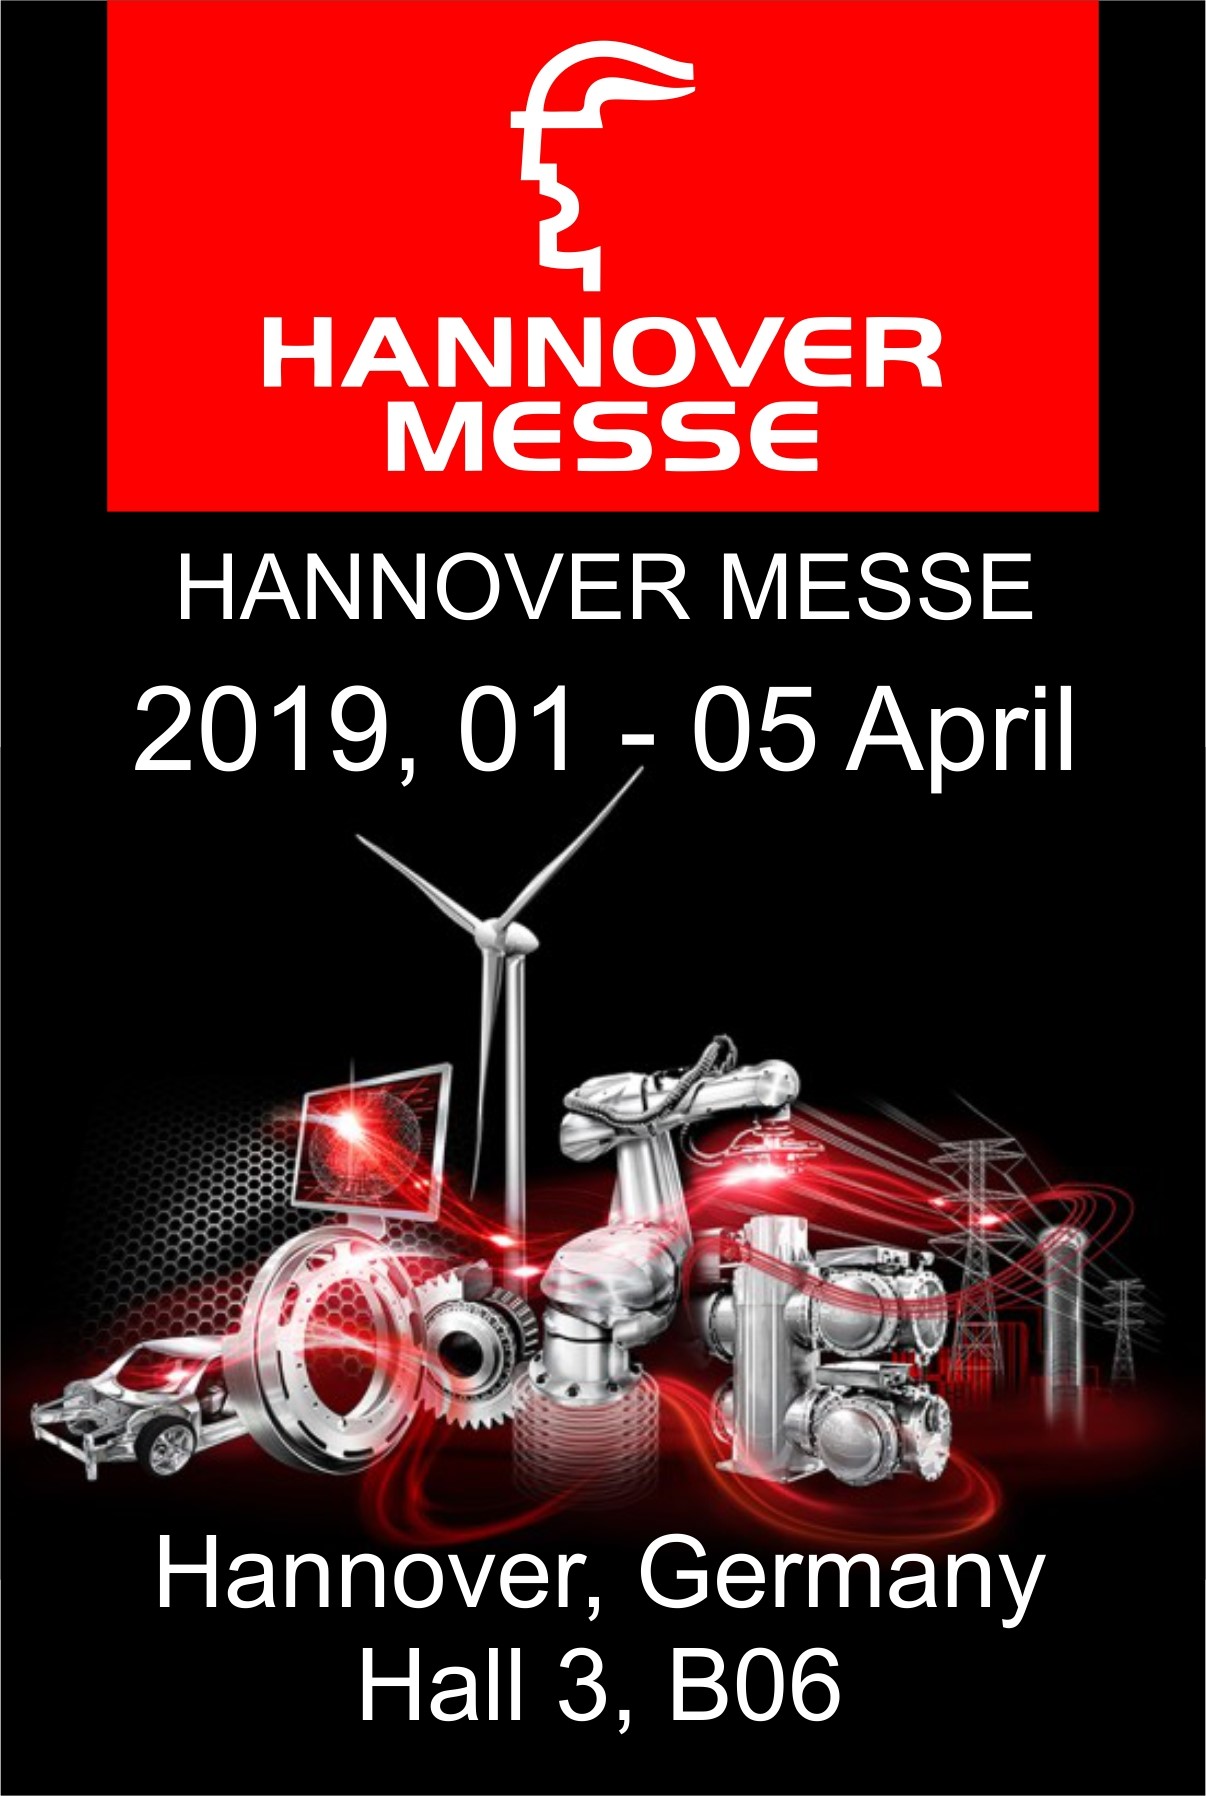 Hannover Messe 2019 with Echaintool from Taiwan